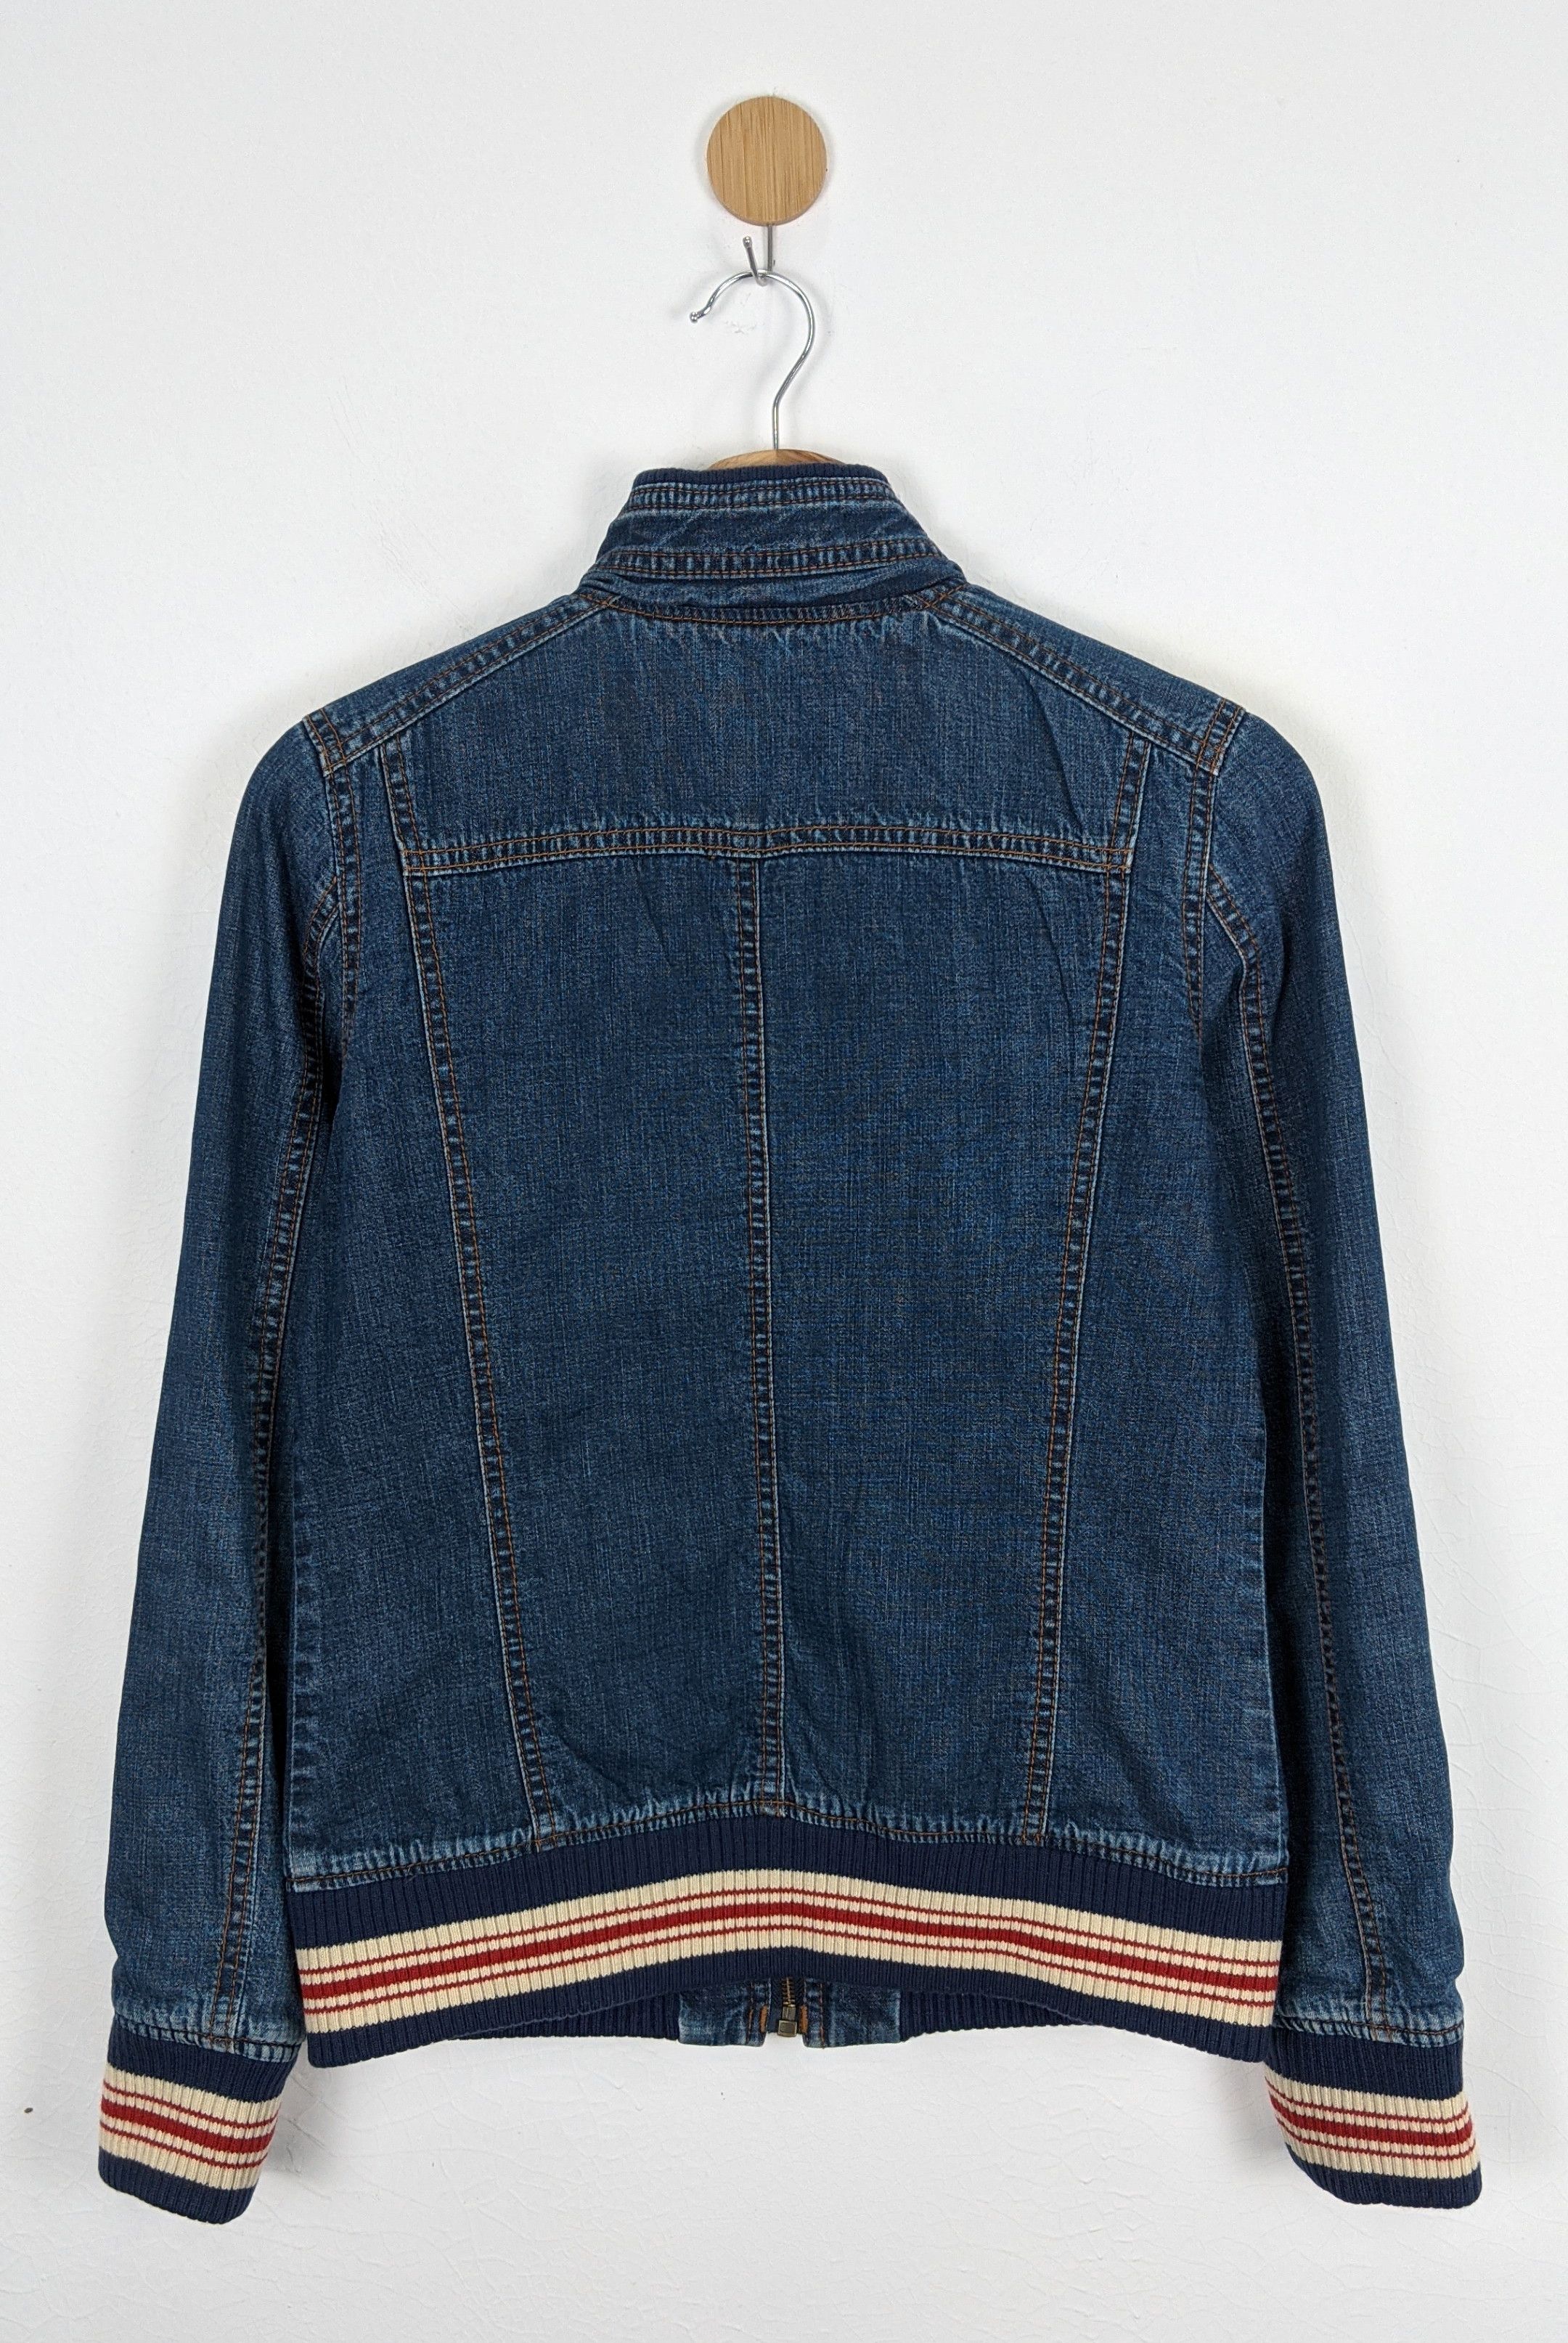 Hysteric Glamour Hysteric Glamour Kinky Denim Groupie Jeans Jacket Size US S / EU 44-46 / 1 - 4 Thumbnail